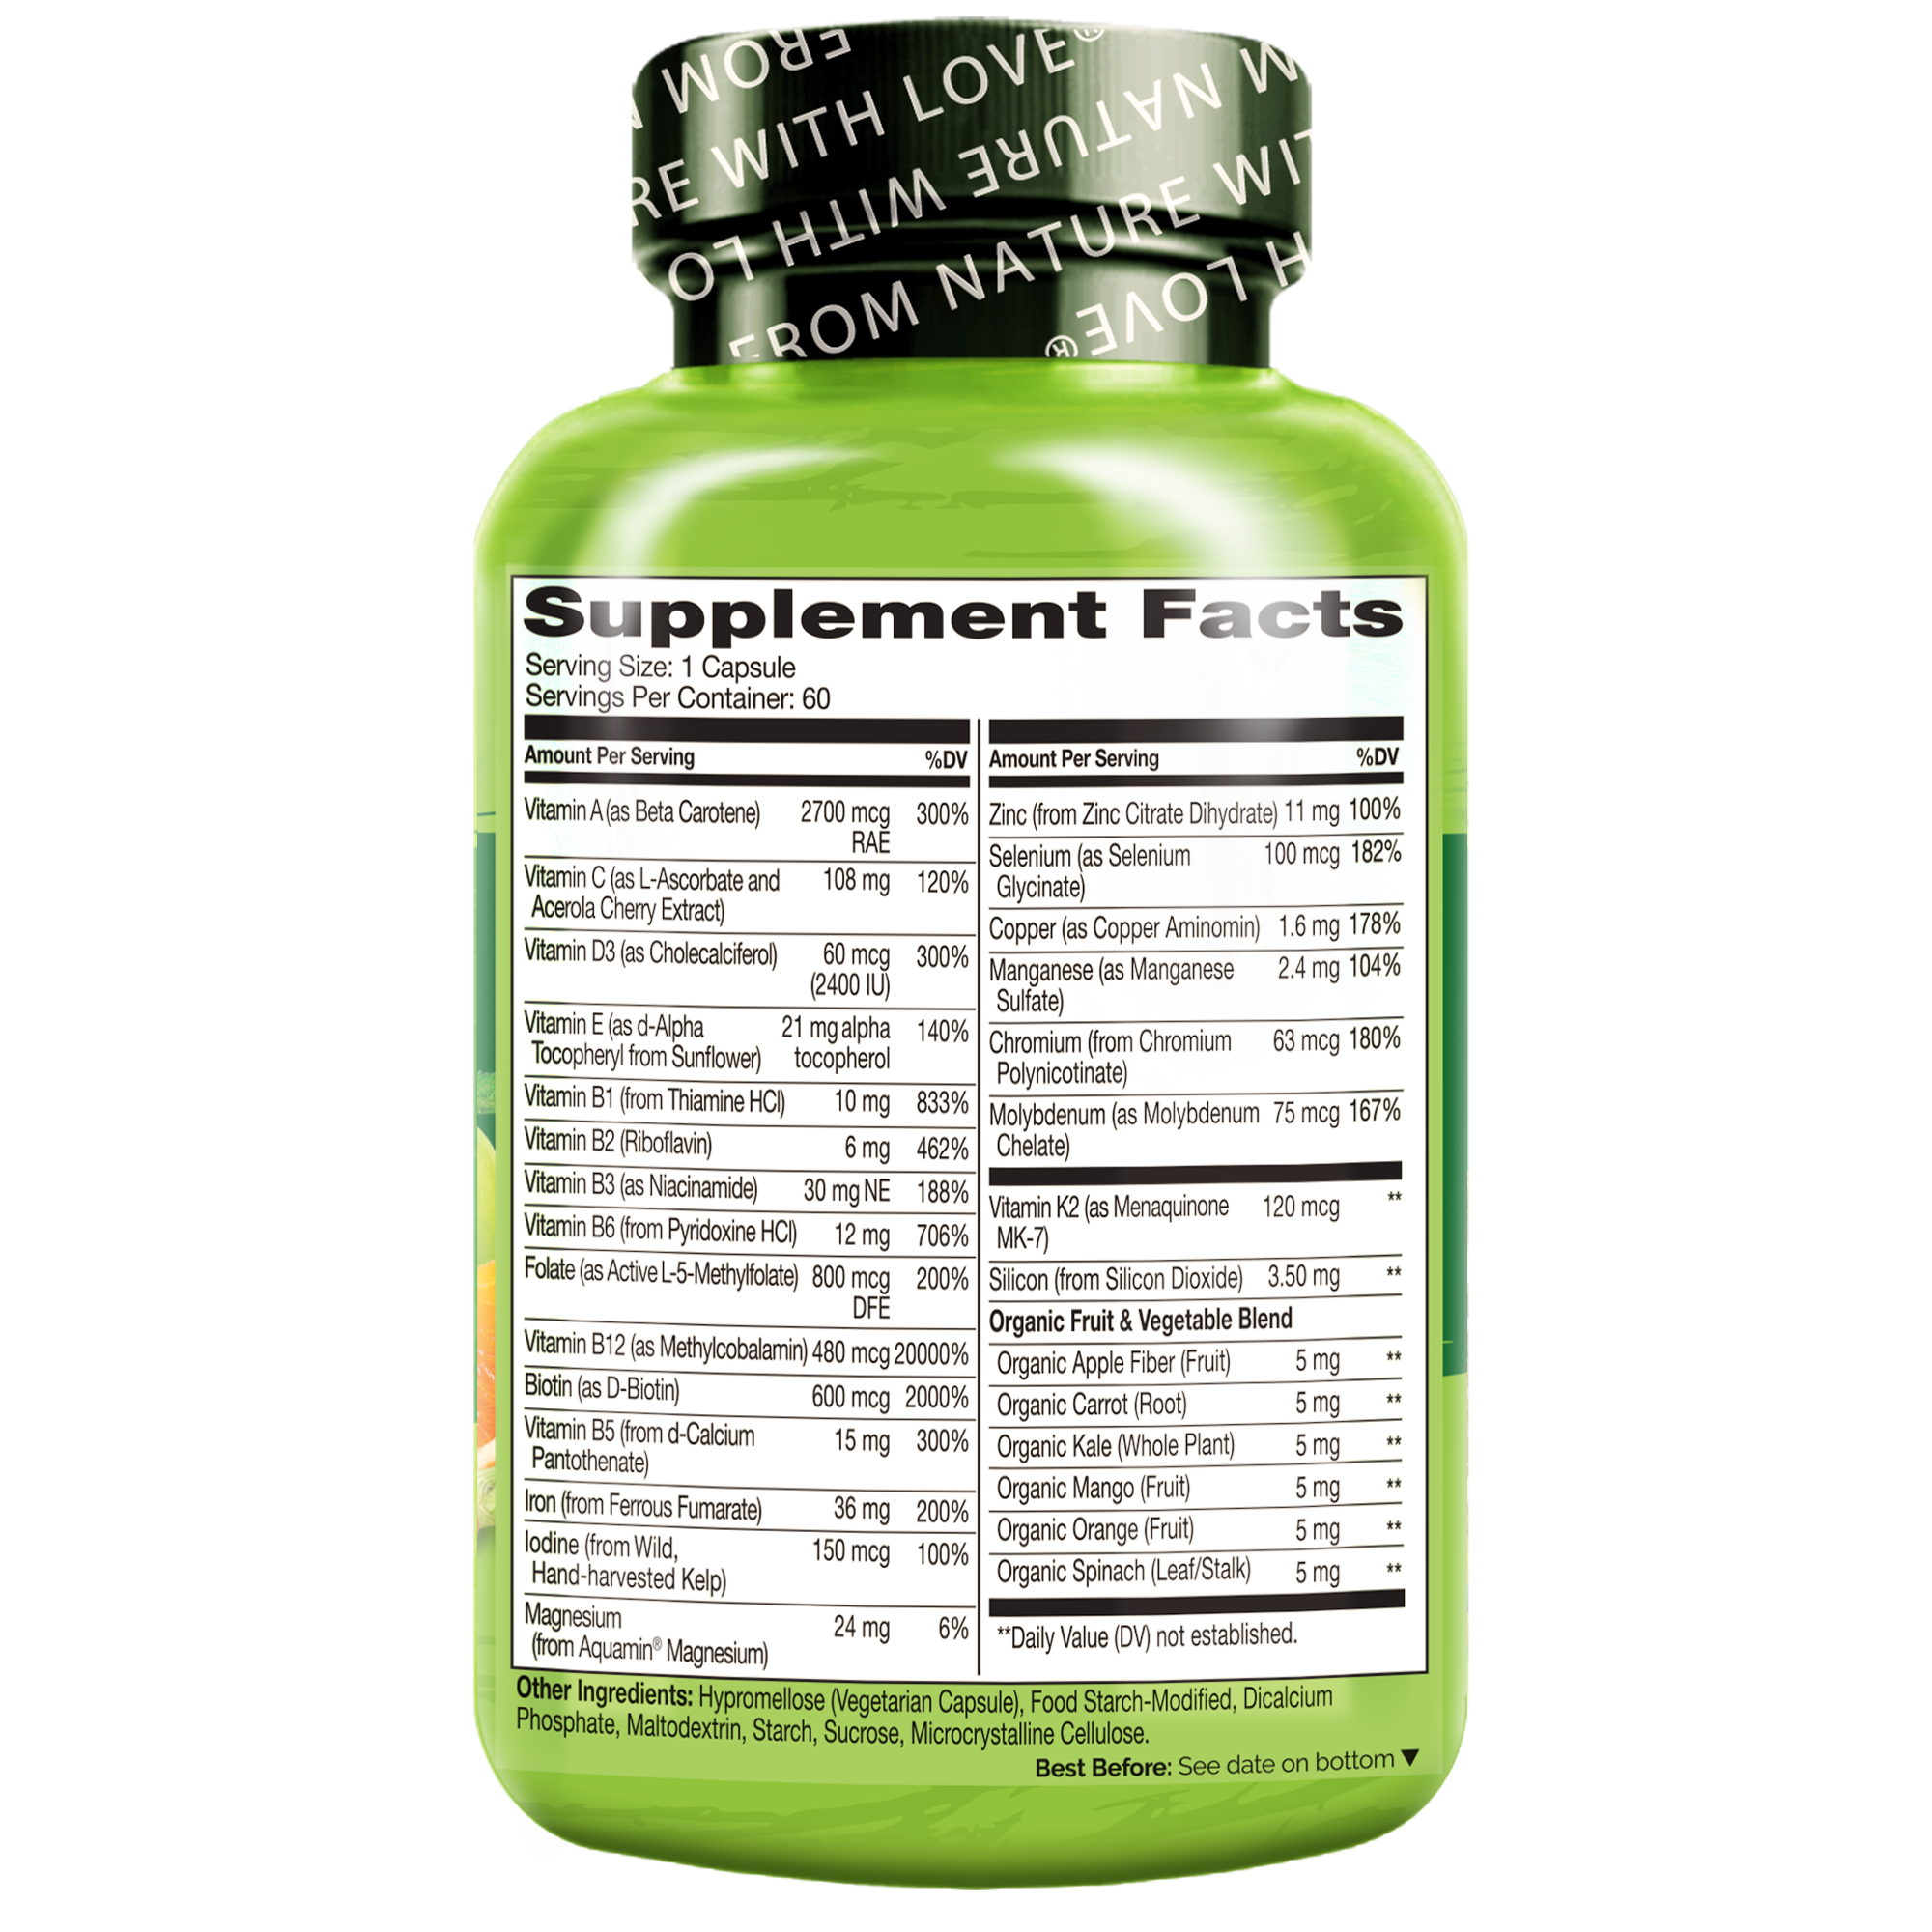 Bariatric Multivitamin for Post Gastric Bypass Surgery Patients